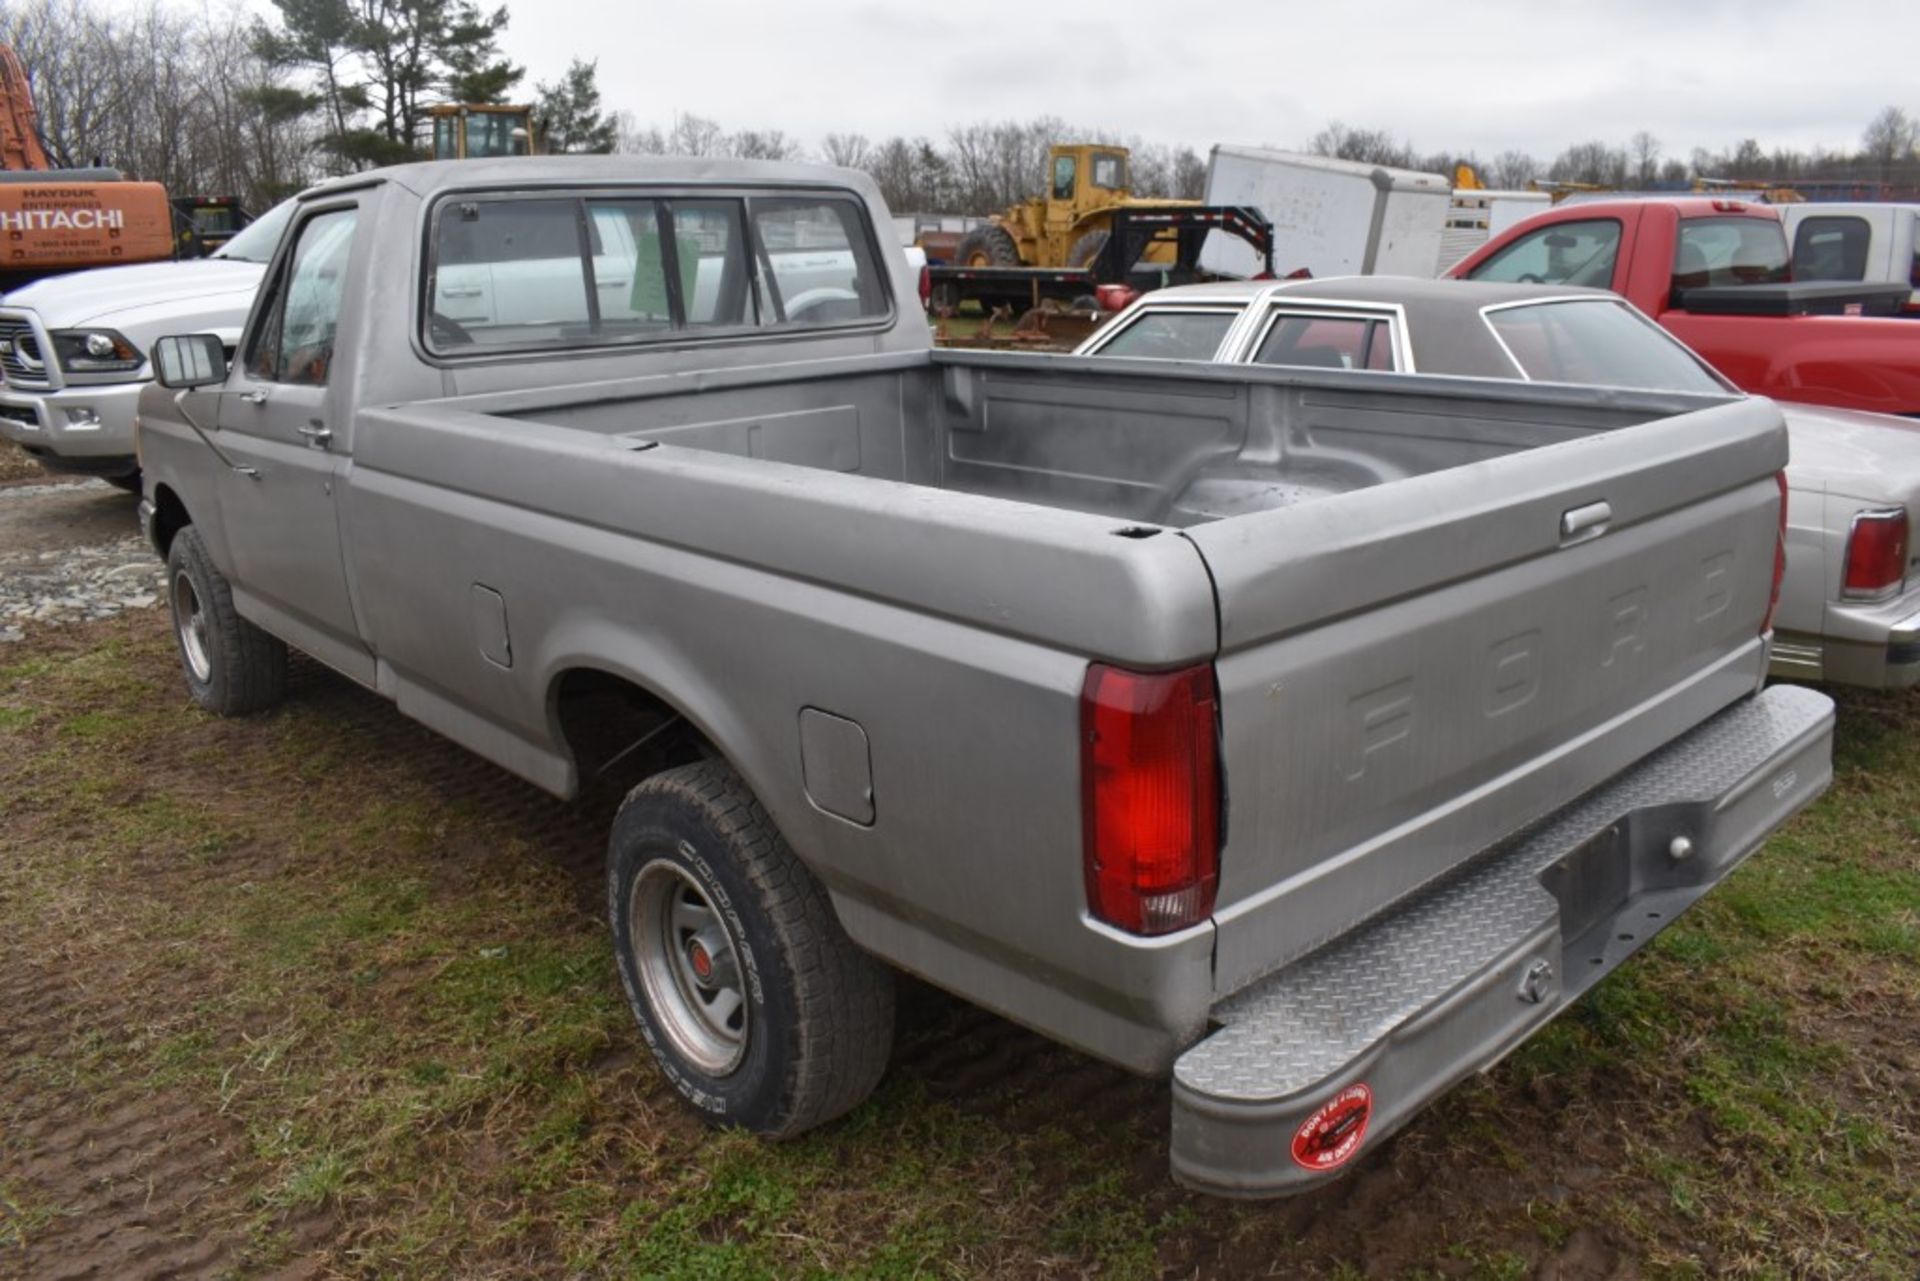 1987 Ford F-150 Truck - Image 7 of 36